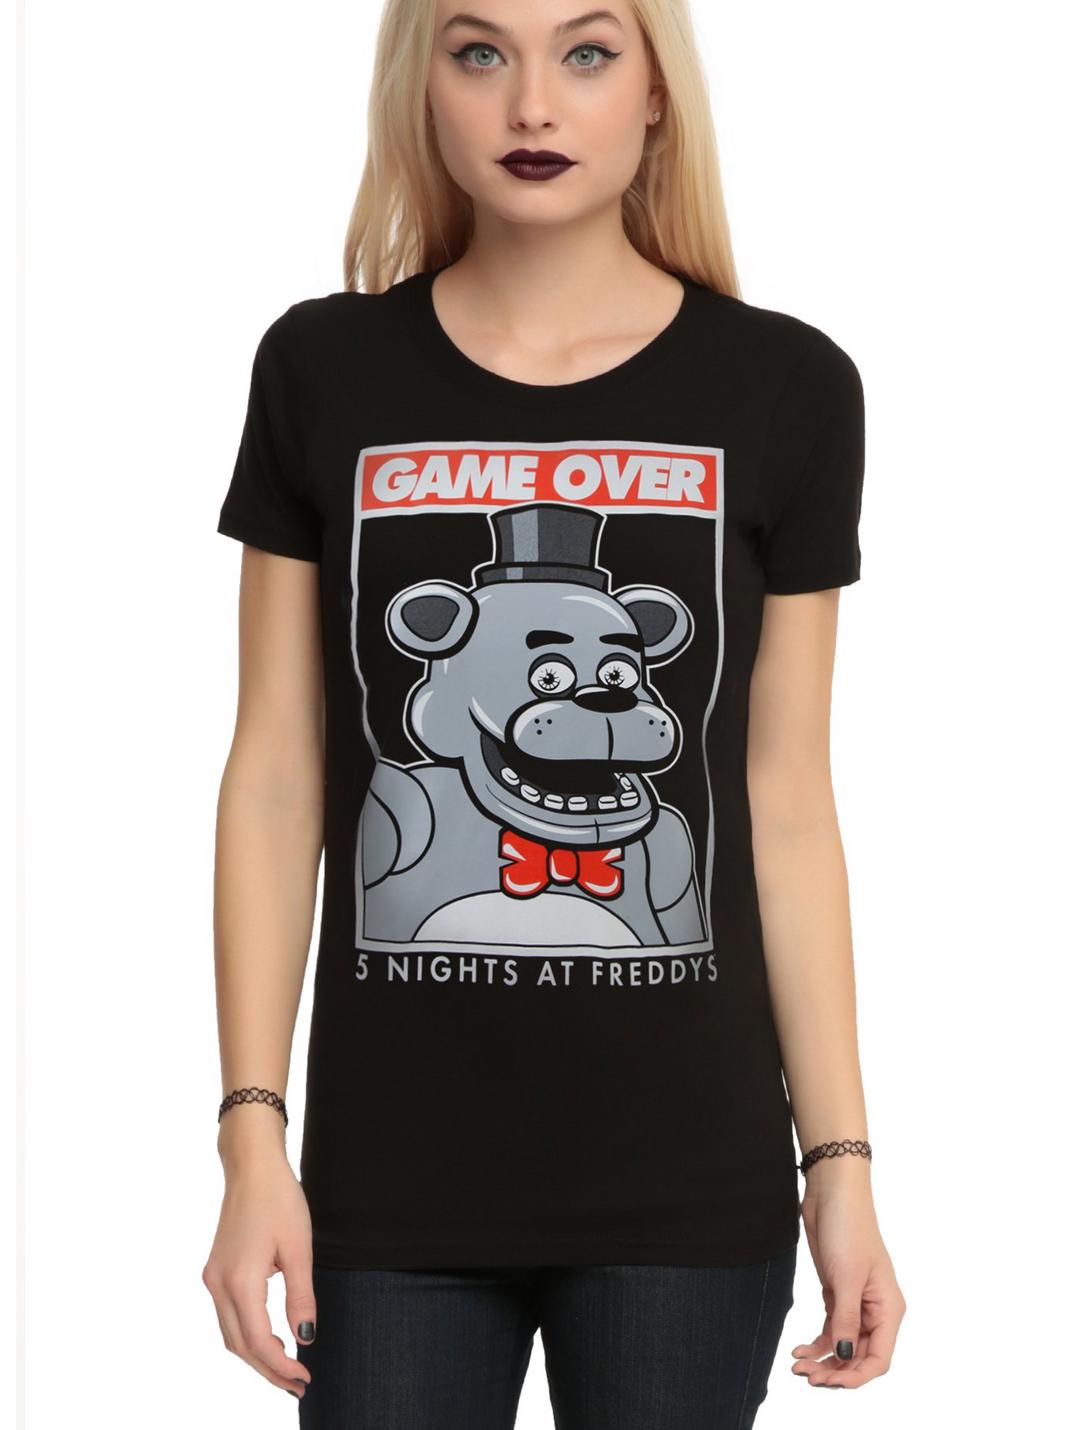 Five Nights At Freddy's Game Over Girls T-Shirt, BLACK, hi-res